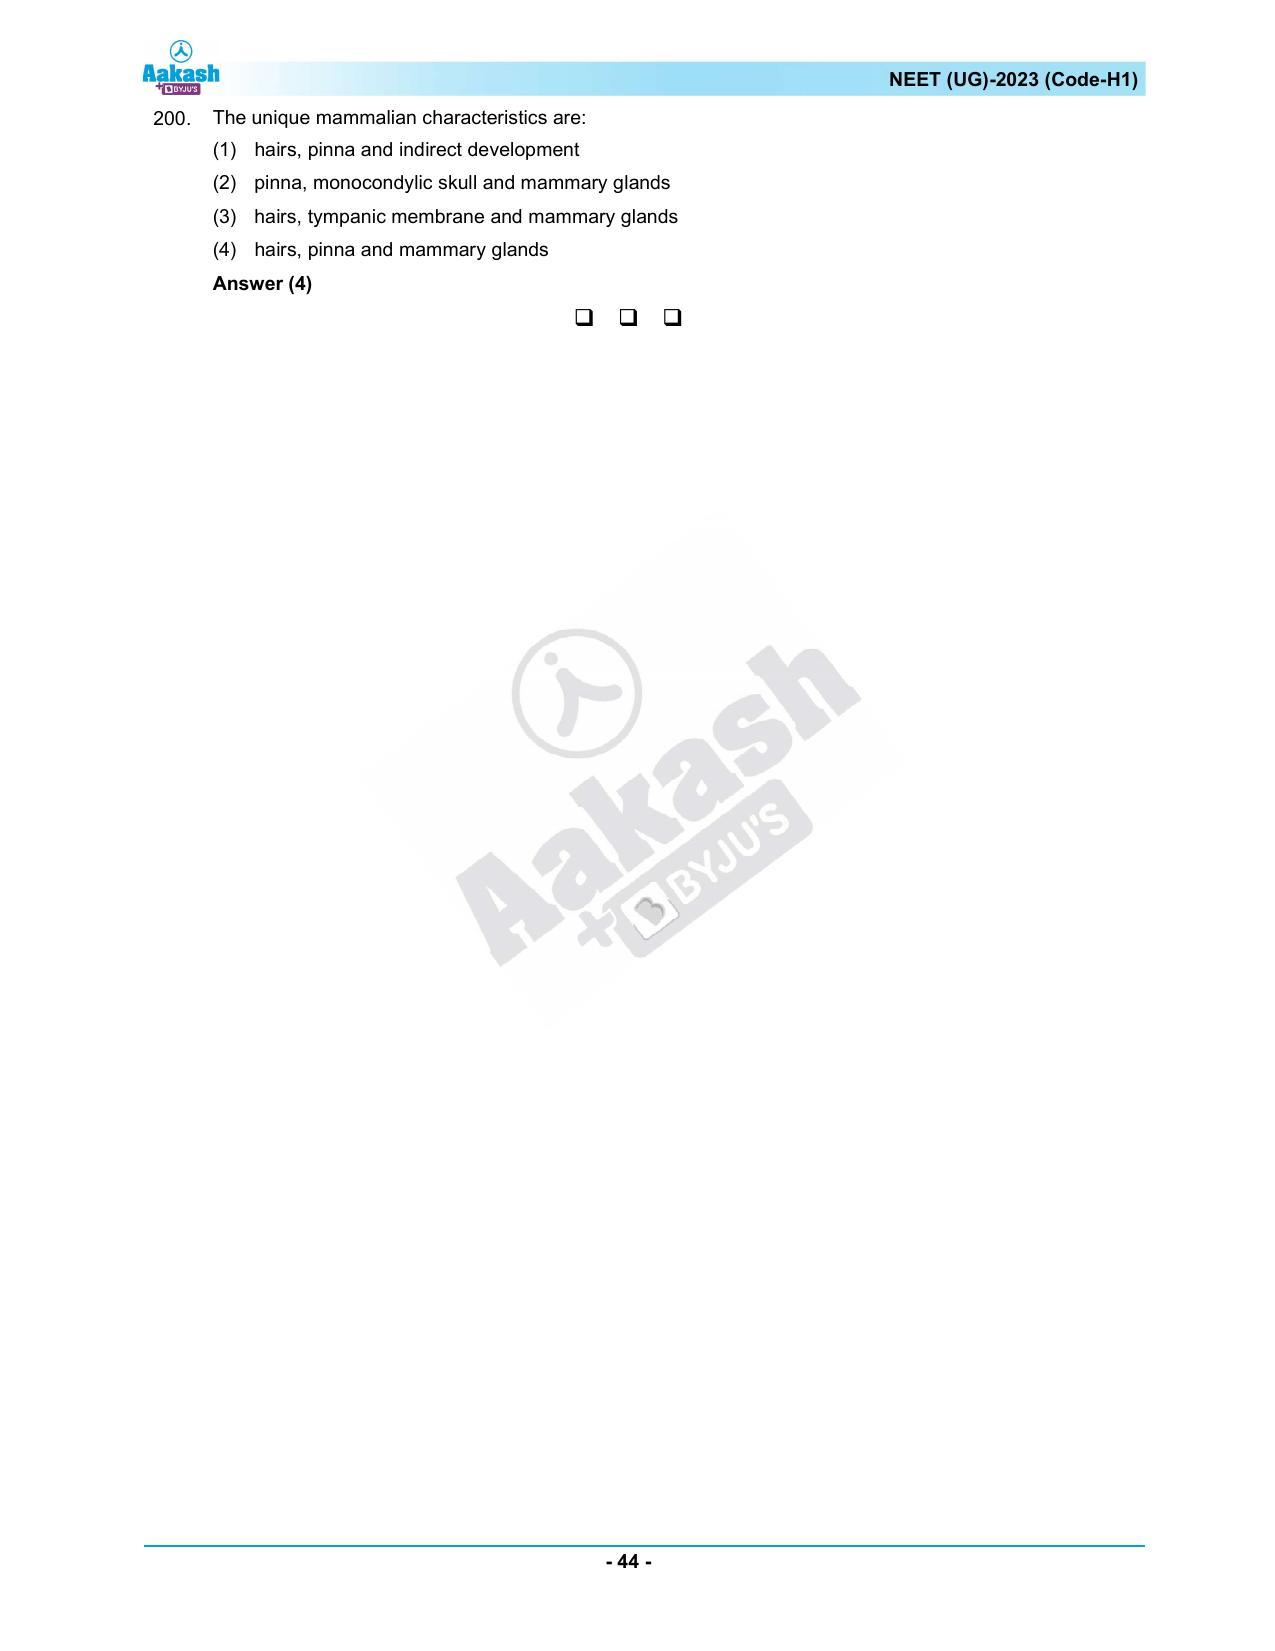 NEET 2023 Question Paper H1 - Page 44